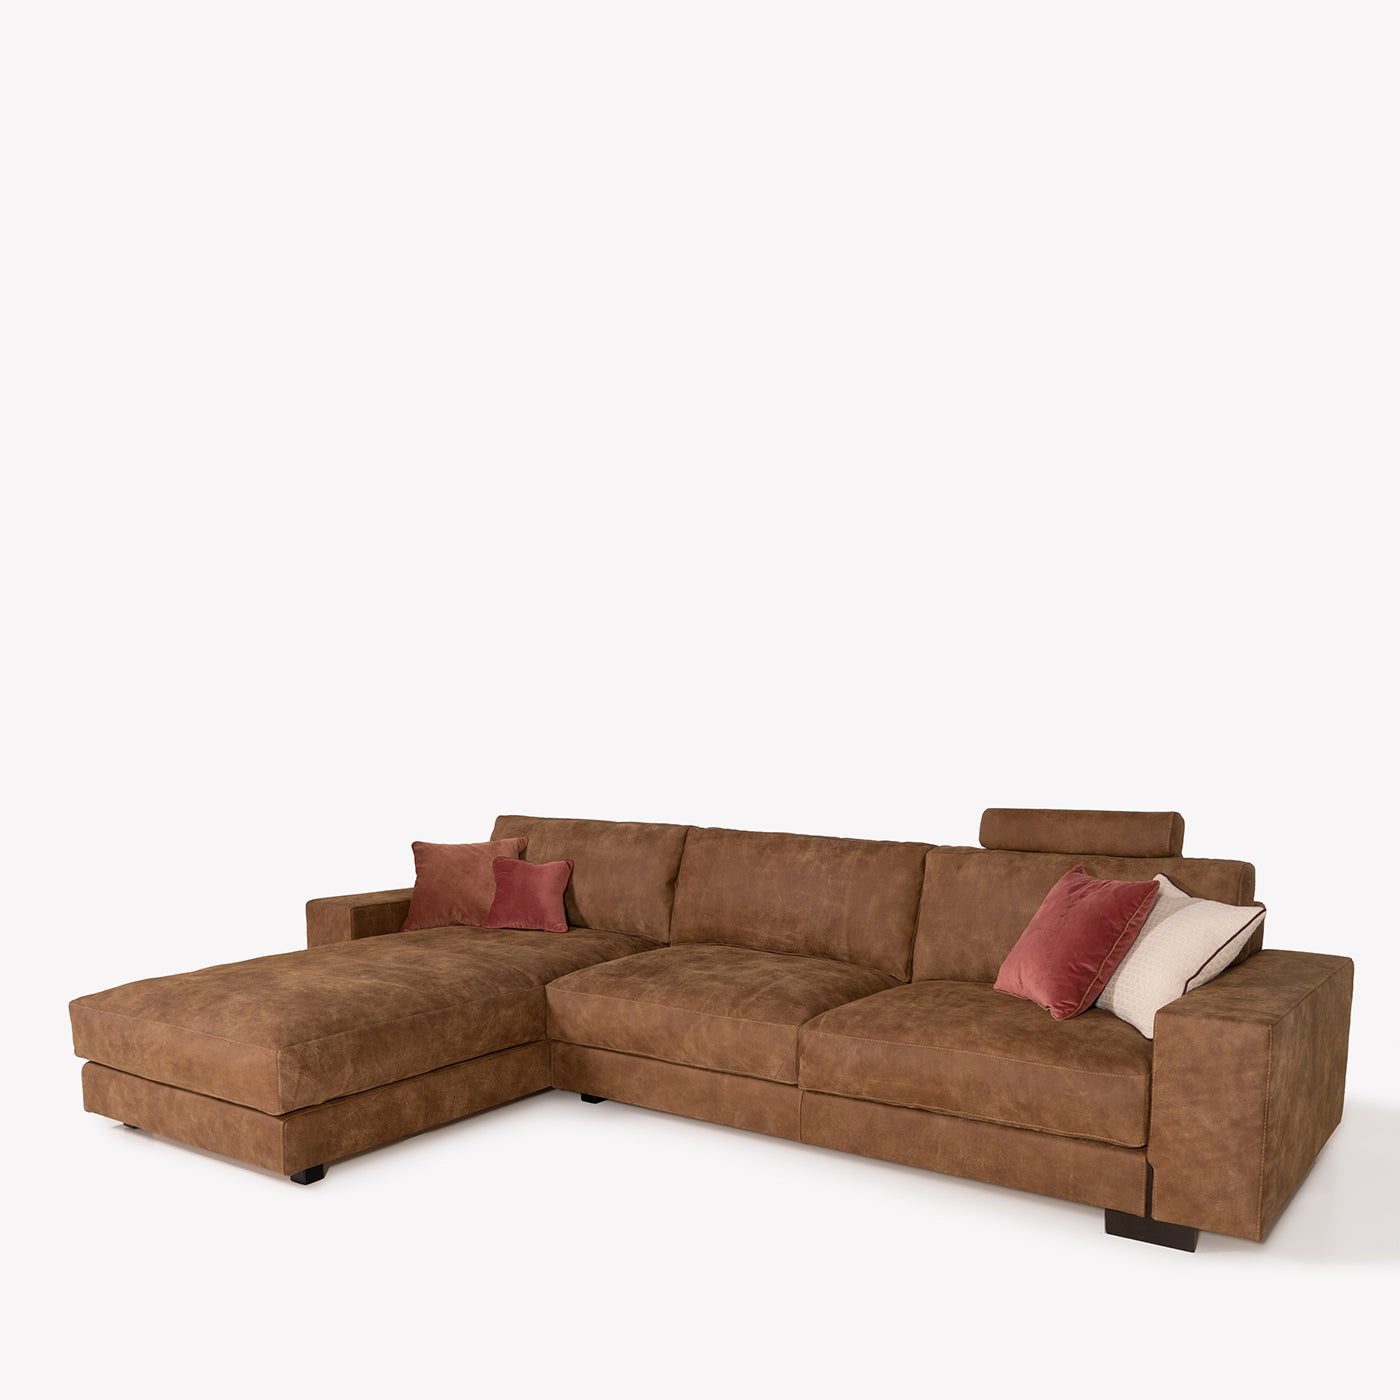 Glam 3-Seater Sofa Chaise Longue by Marco and Giulio Mantellassi - Vue alternative 1